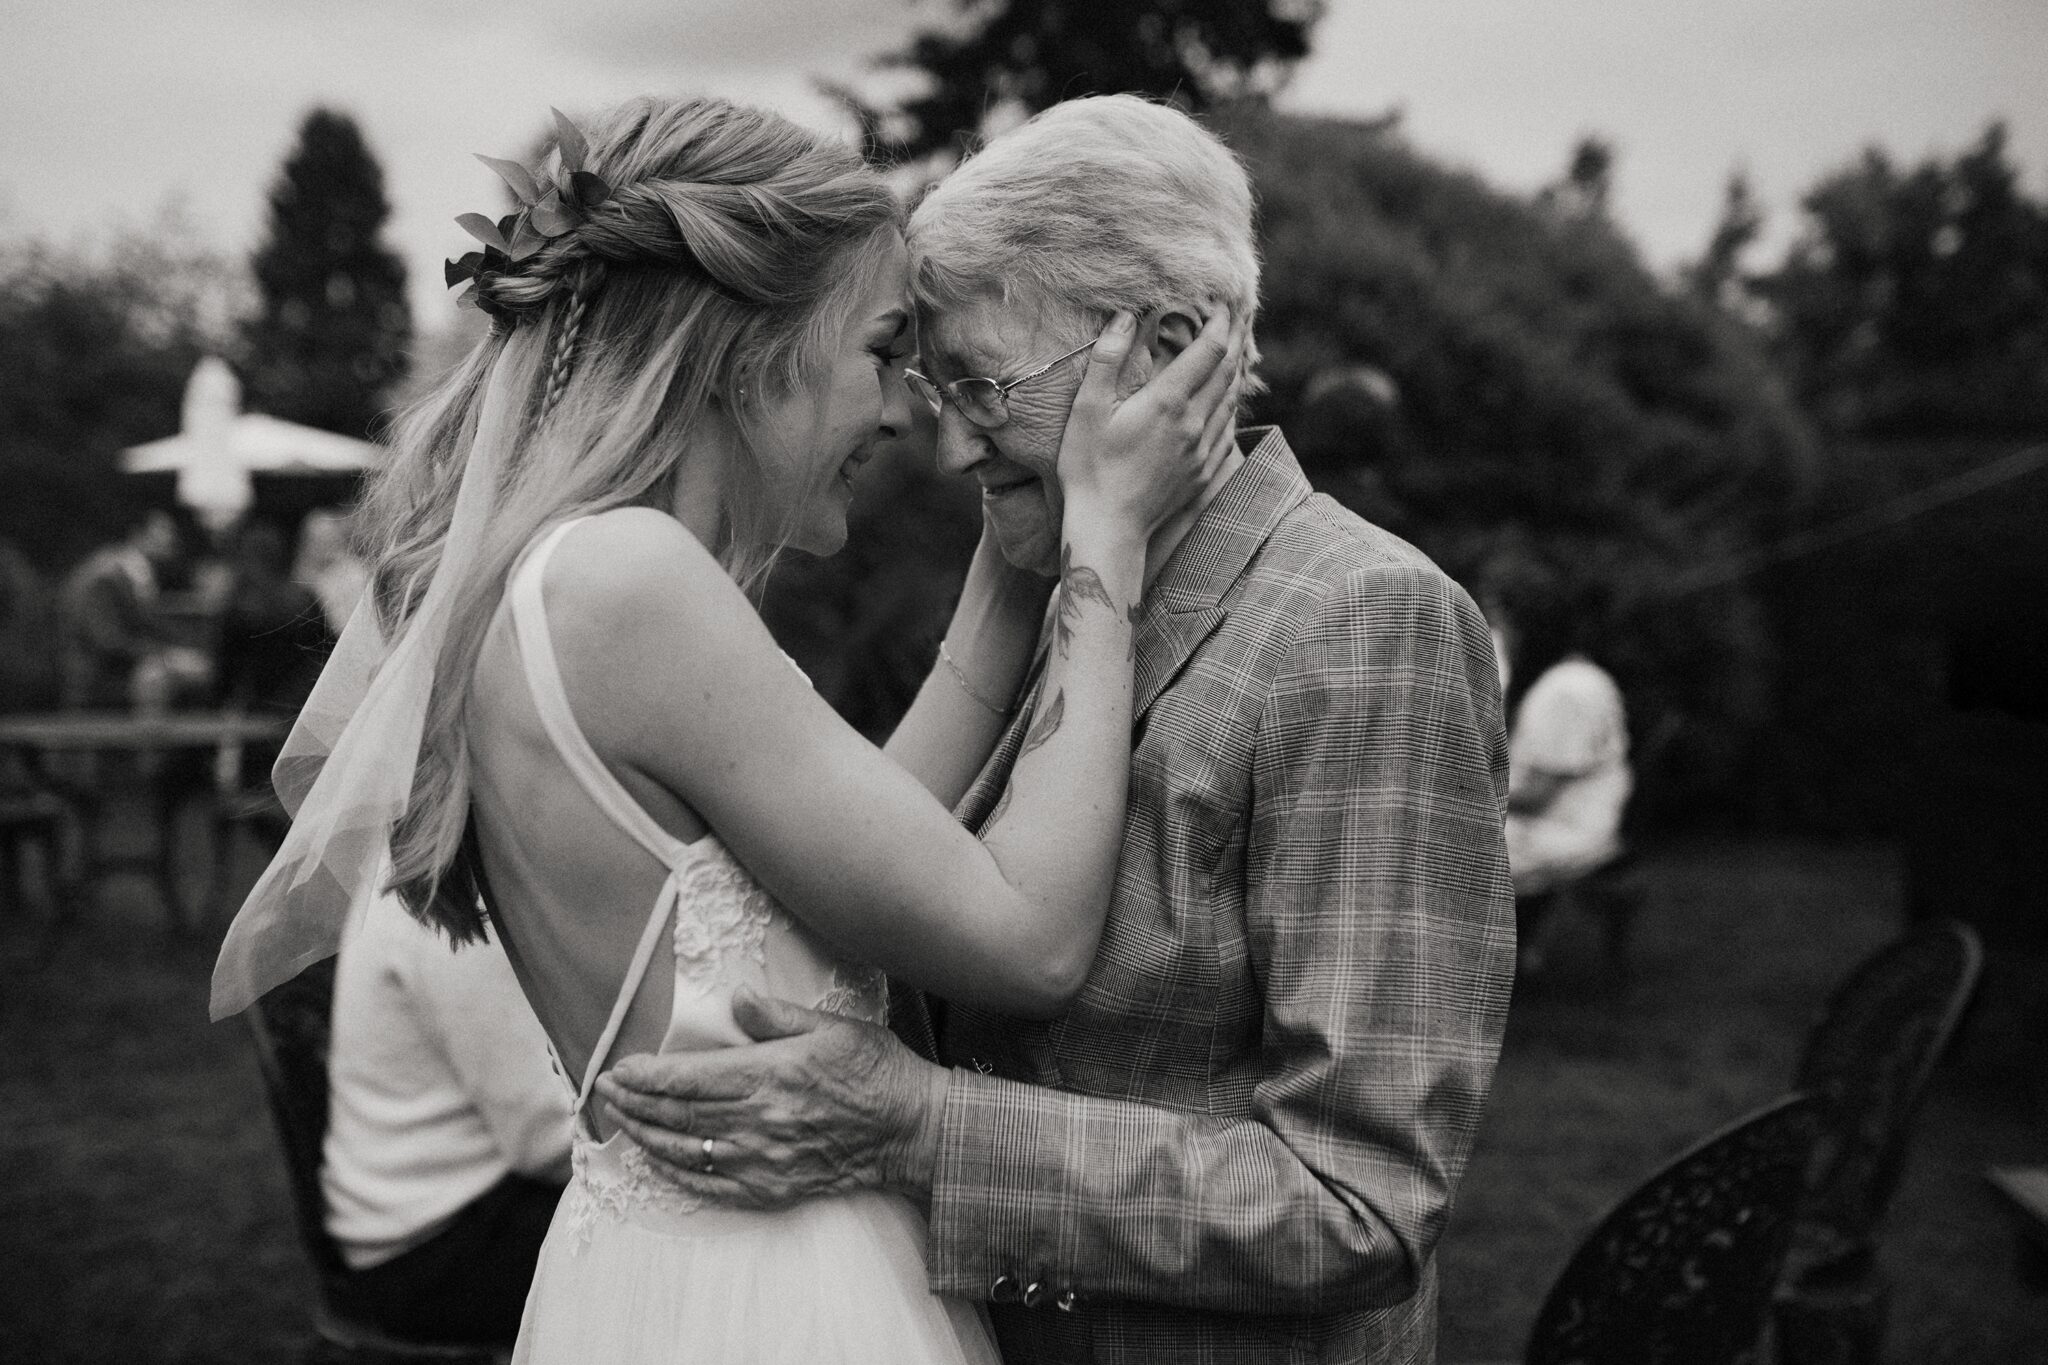 Candid timeless photo of a bride and her grandma hugging head to head on her wedding day